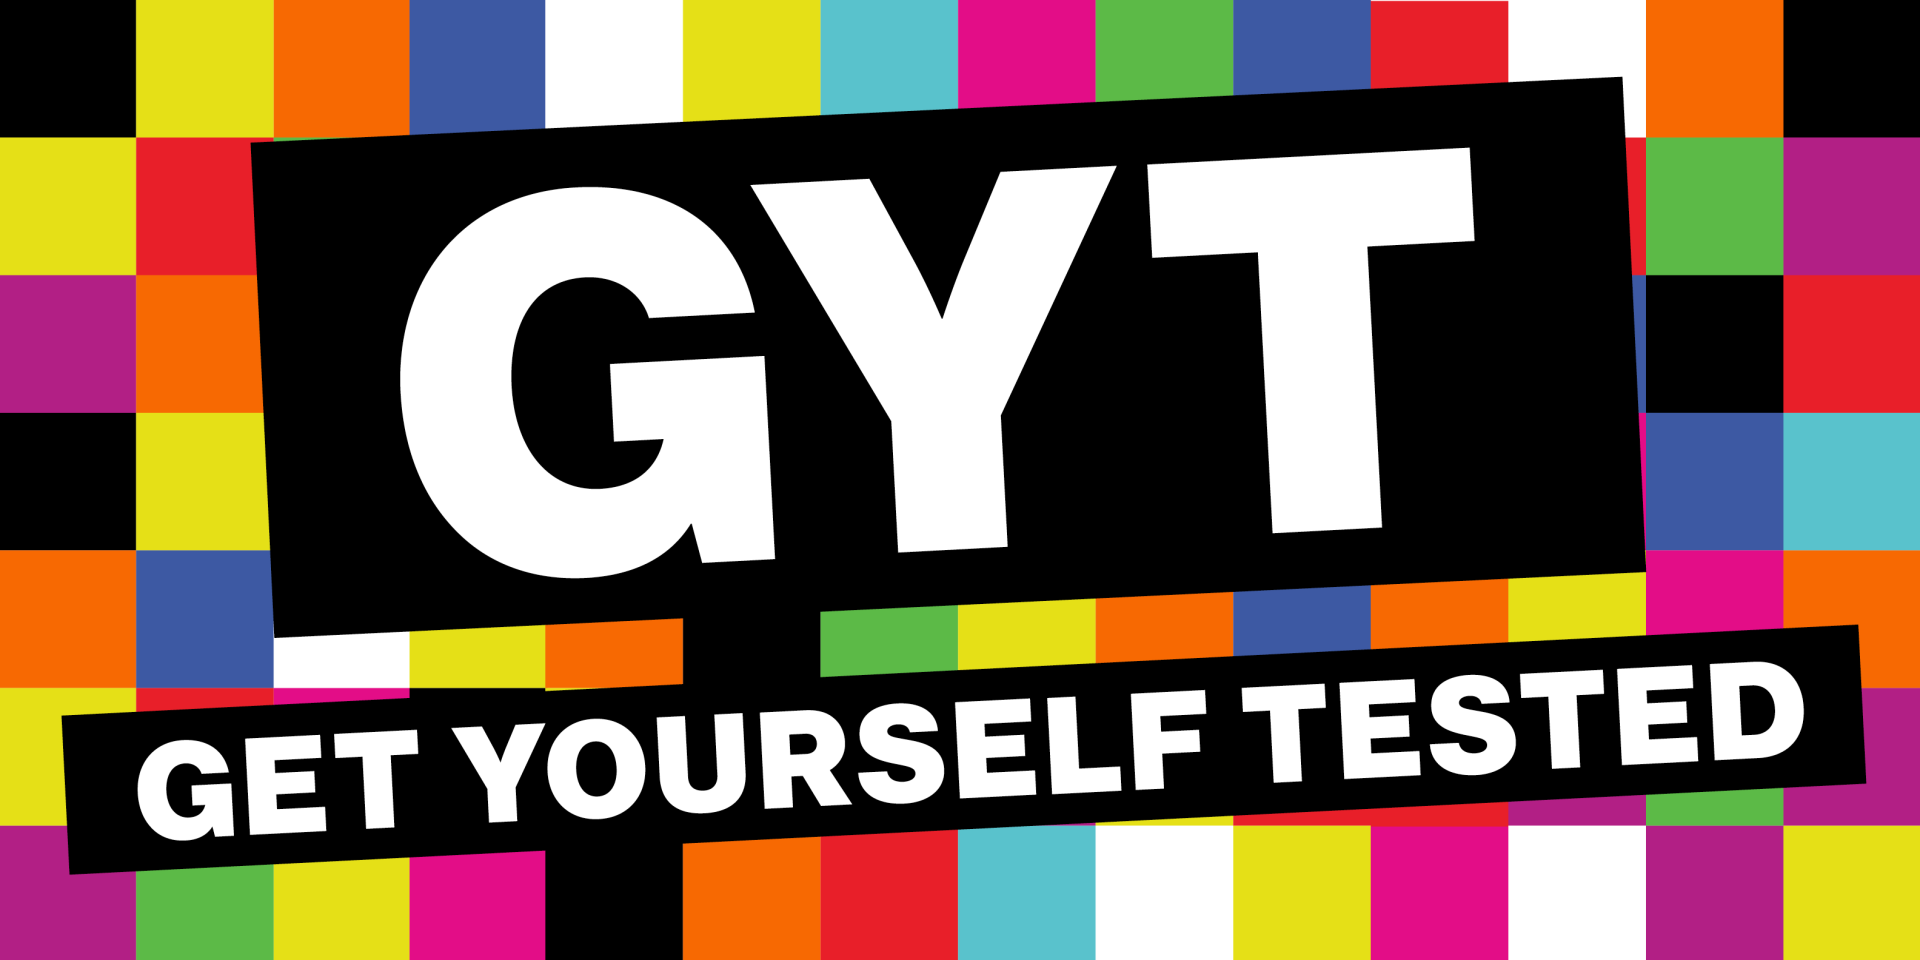 GYT Get Yourself Tested